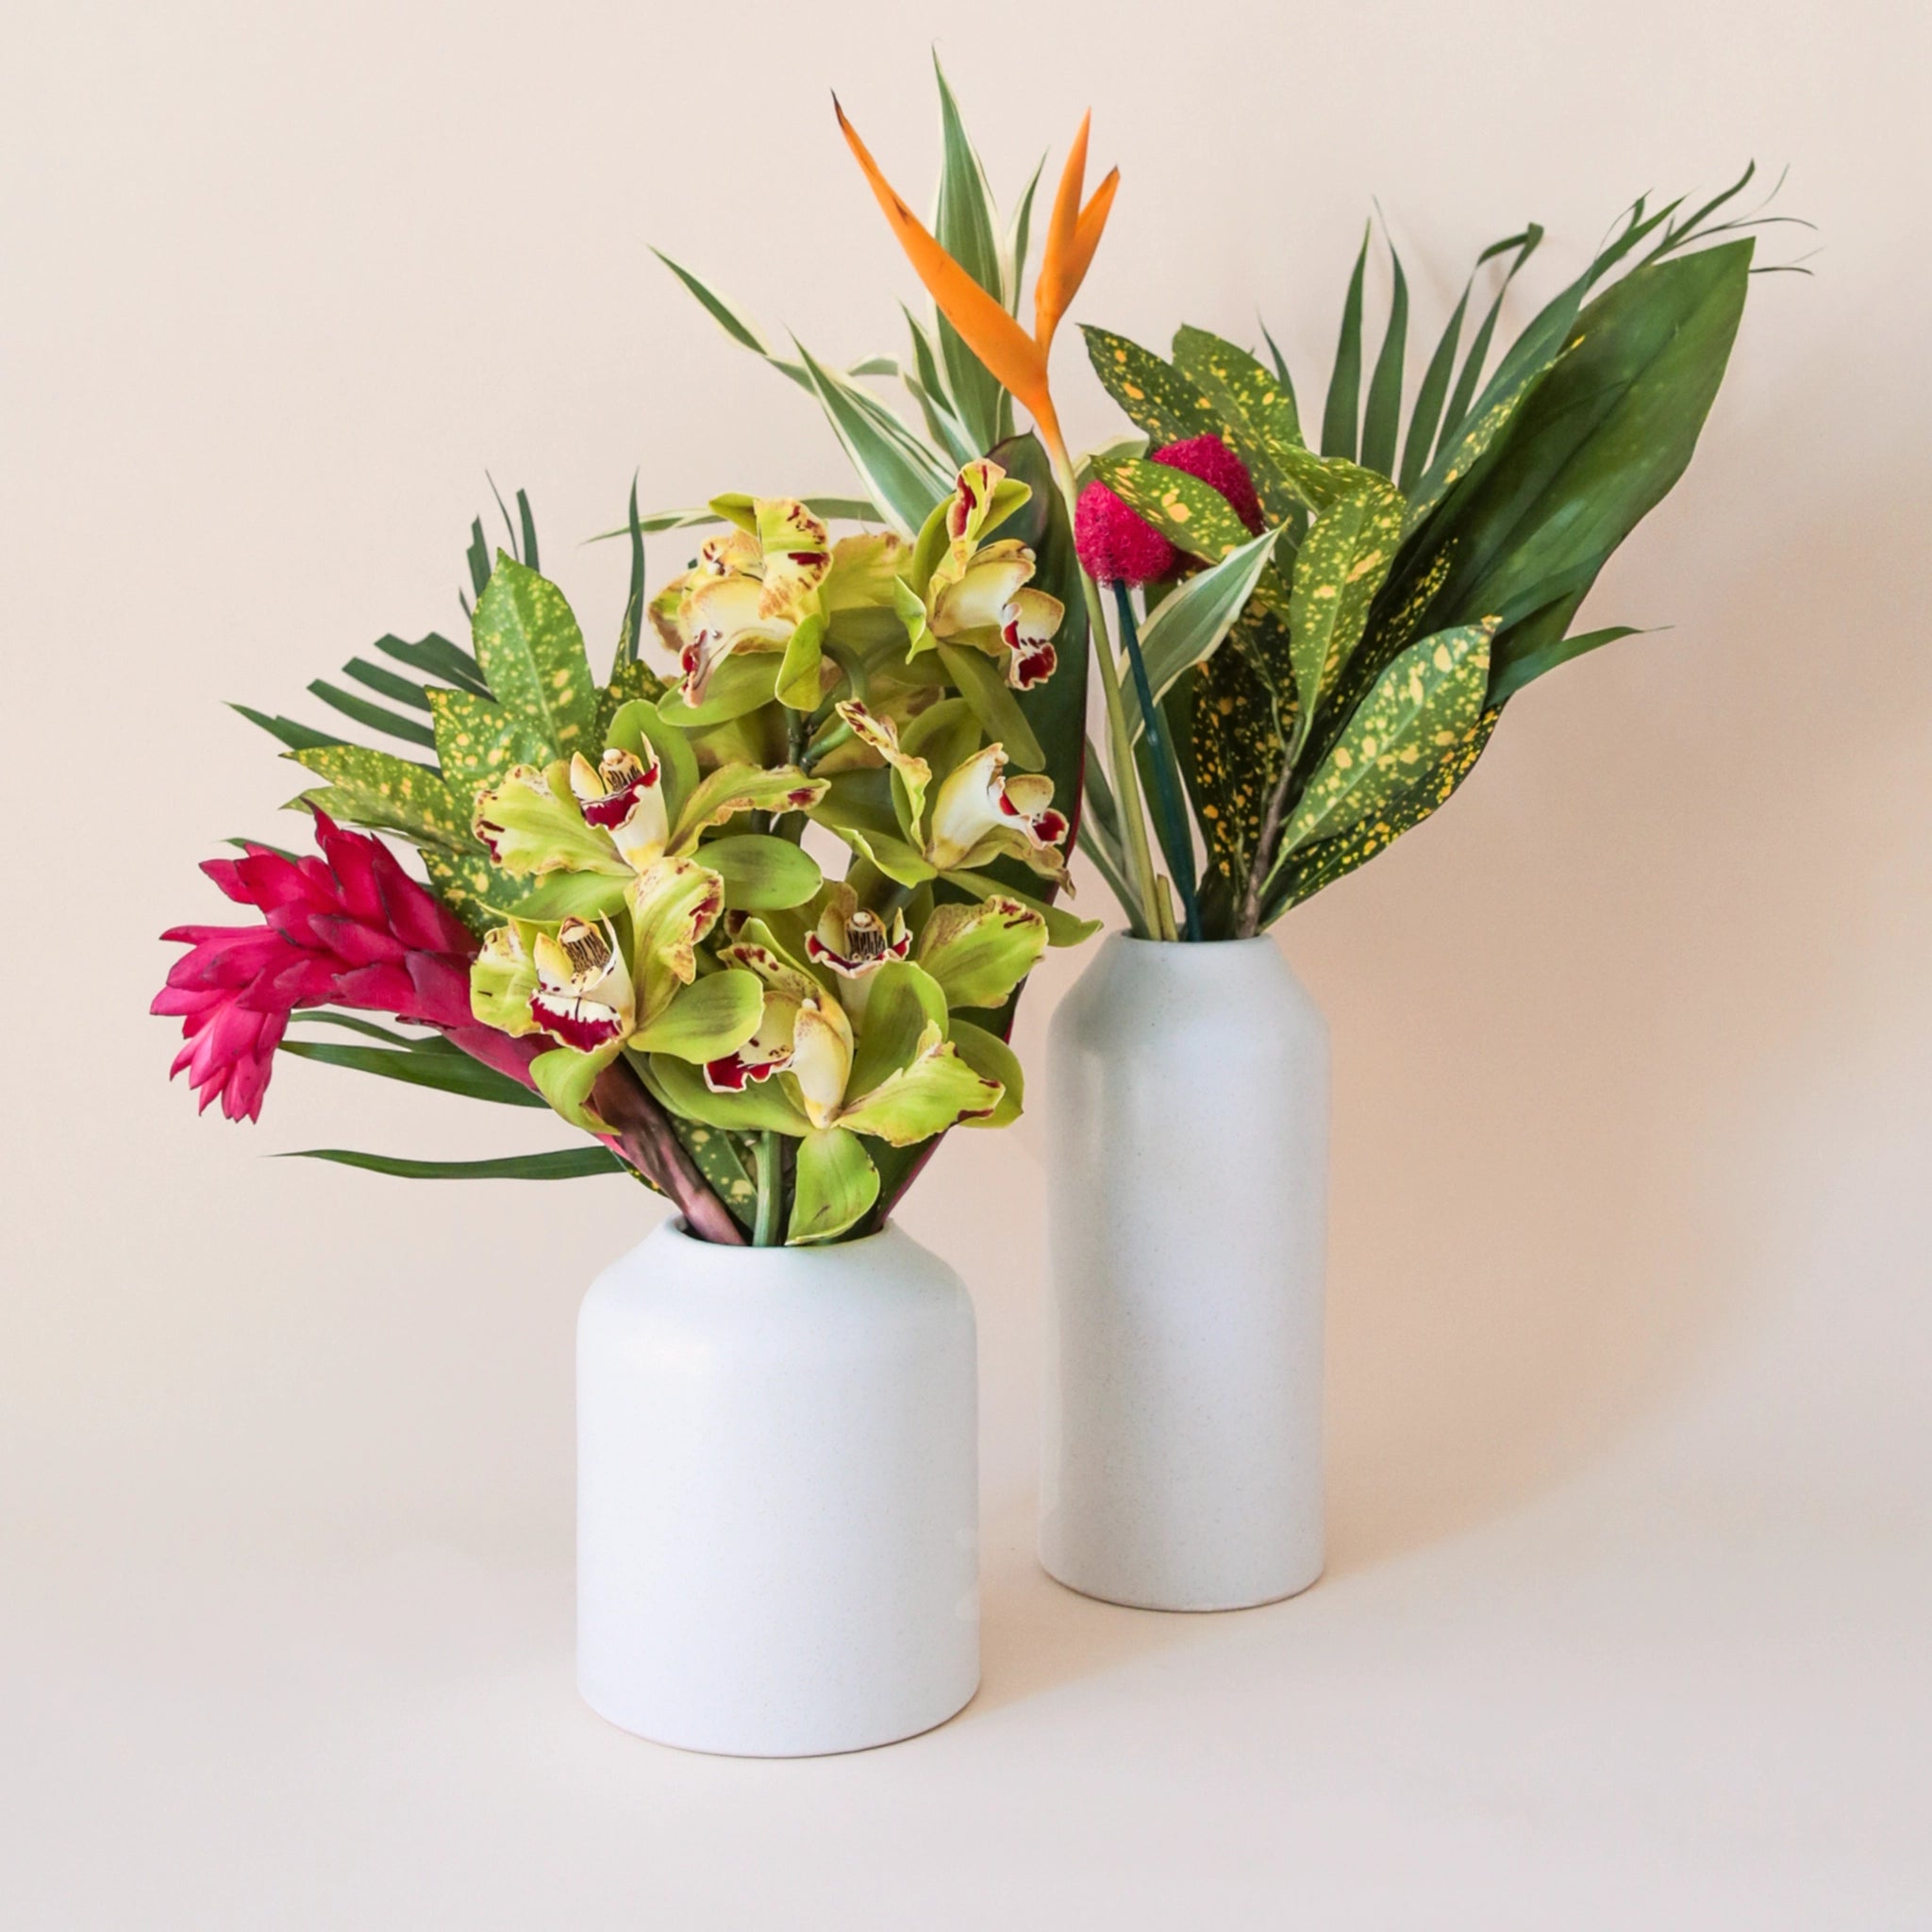 On a cream background is two different sizedl white ceramic vase with an opening at the top and staged with tropical flowers.